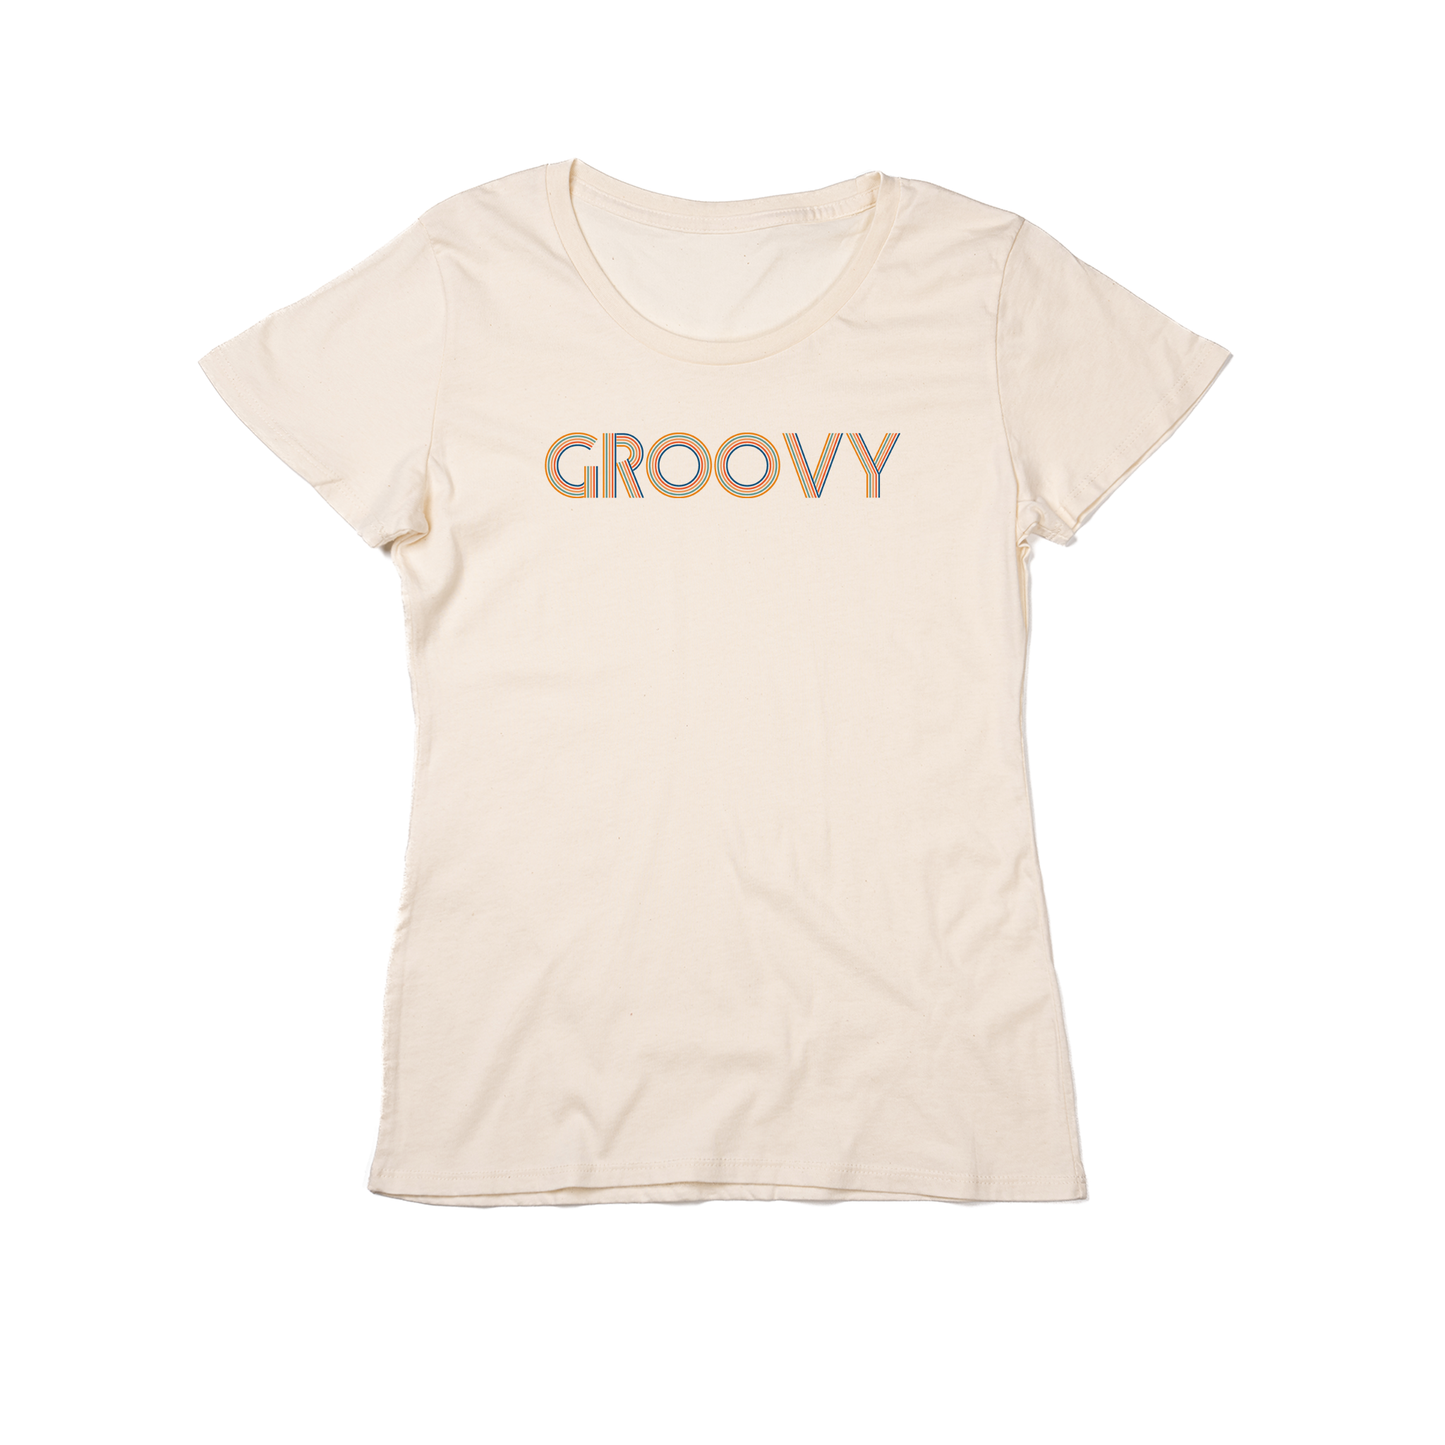 GROOVY (Vintage) - Women's Fitted Tee (Natural)